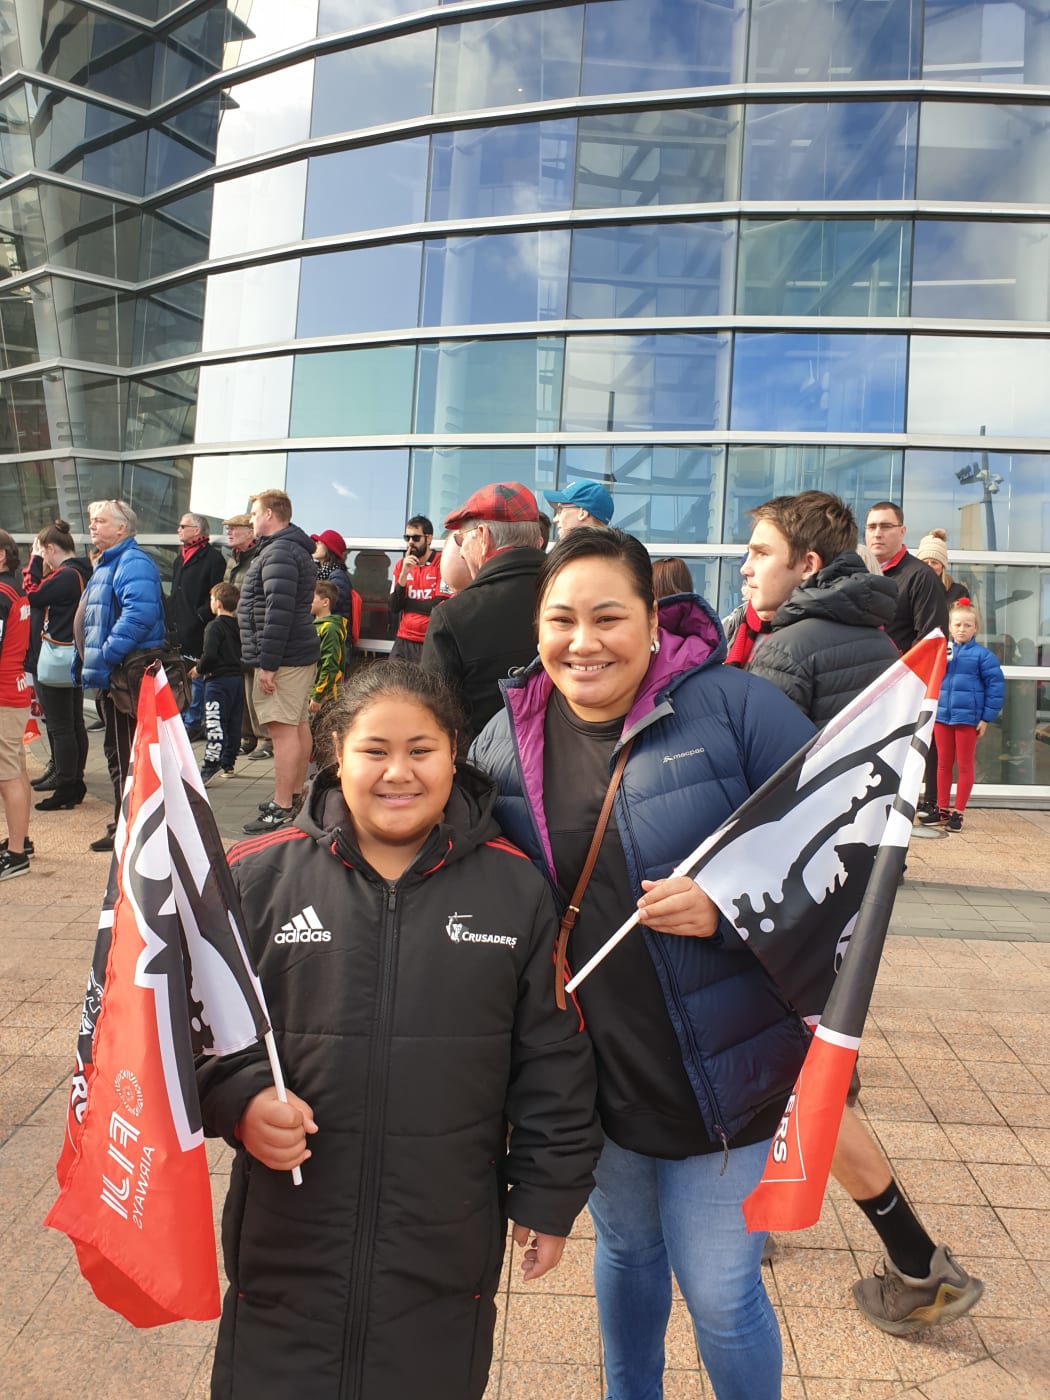 Elisetele Makalio (left) and her older sister Puaga, travelled down from Auckland to watch their brother, Richard Makalio, play for the Crusaders on Saturday.